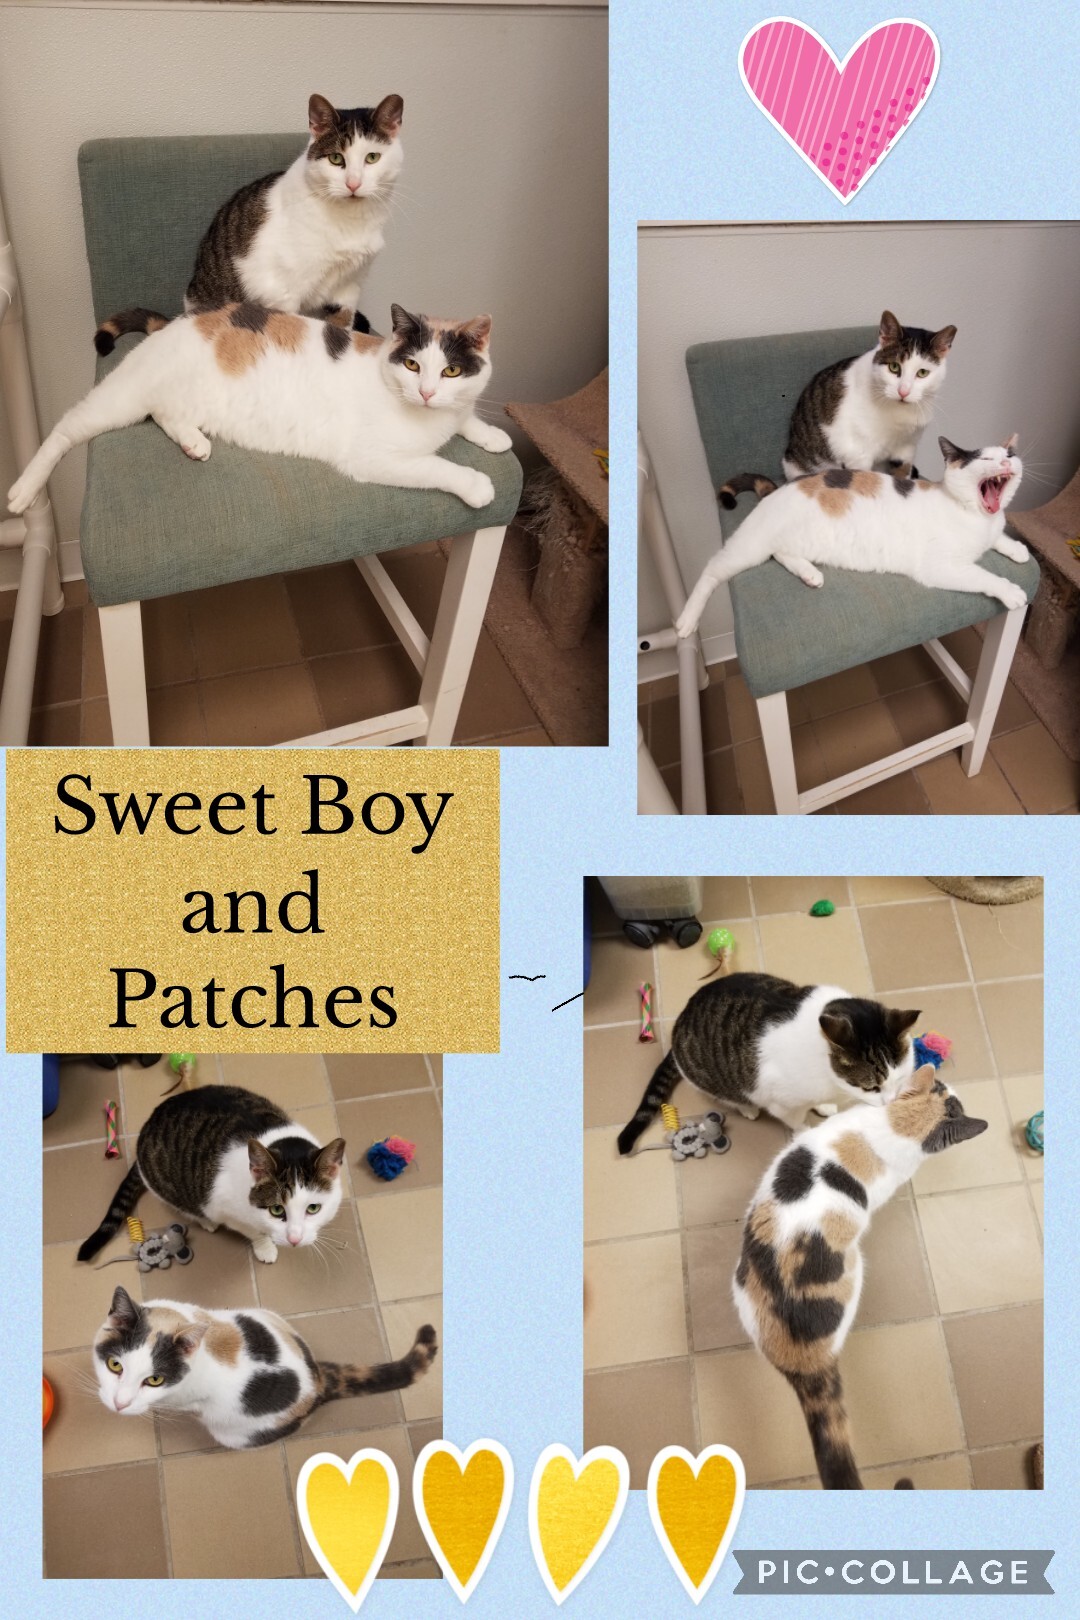 Patches And Sweet Boy detail page